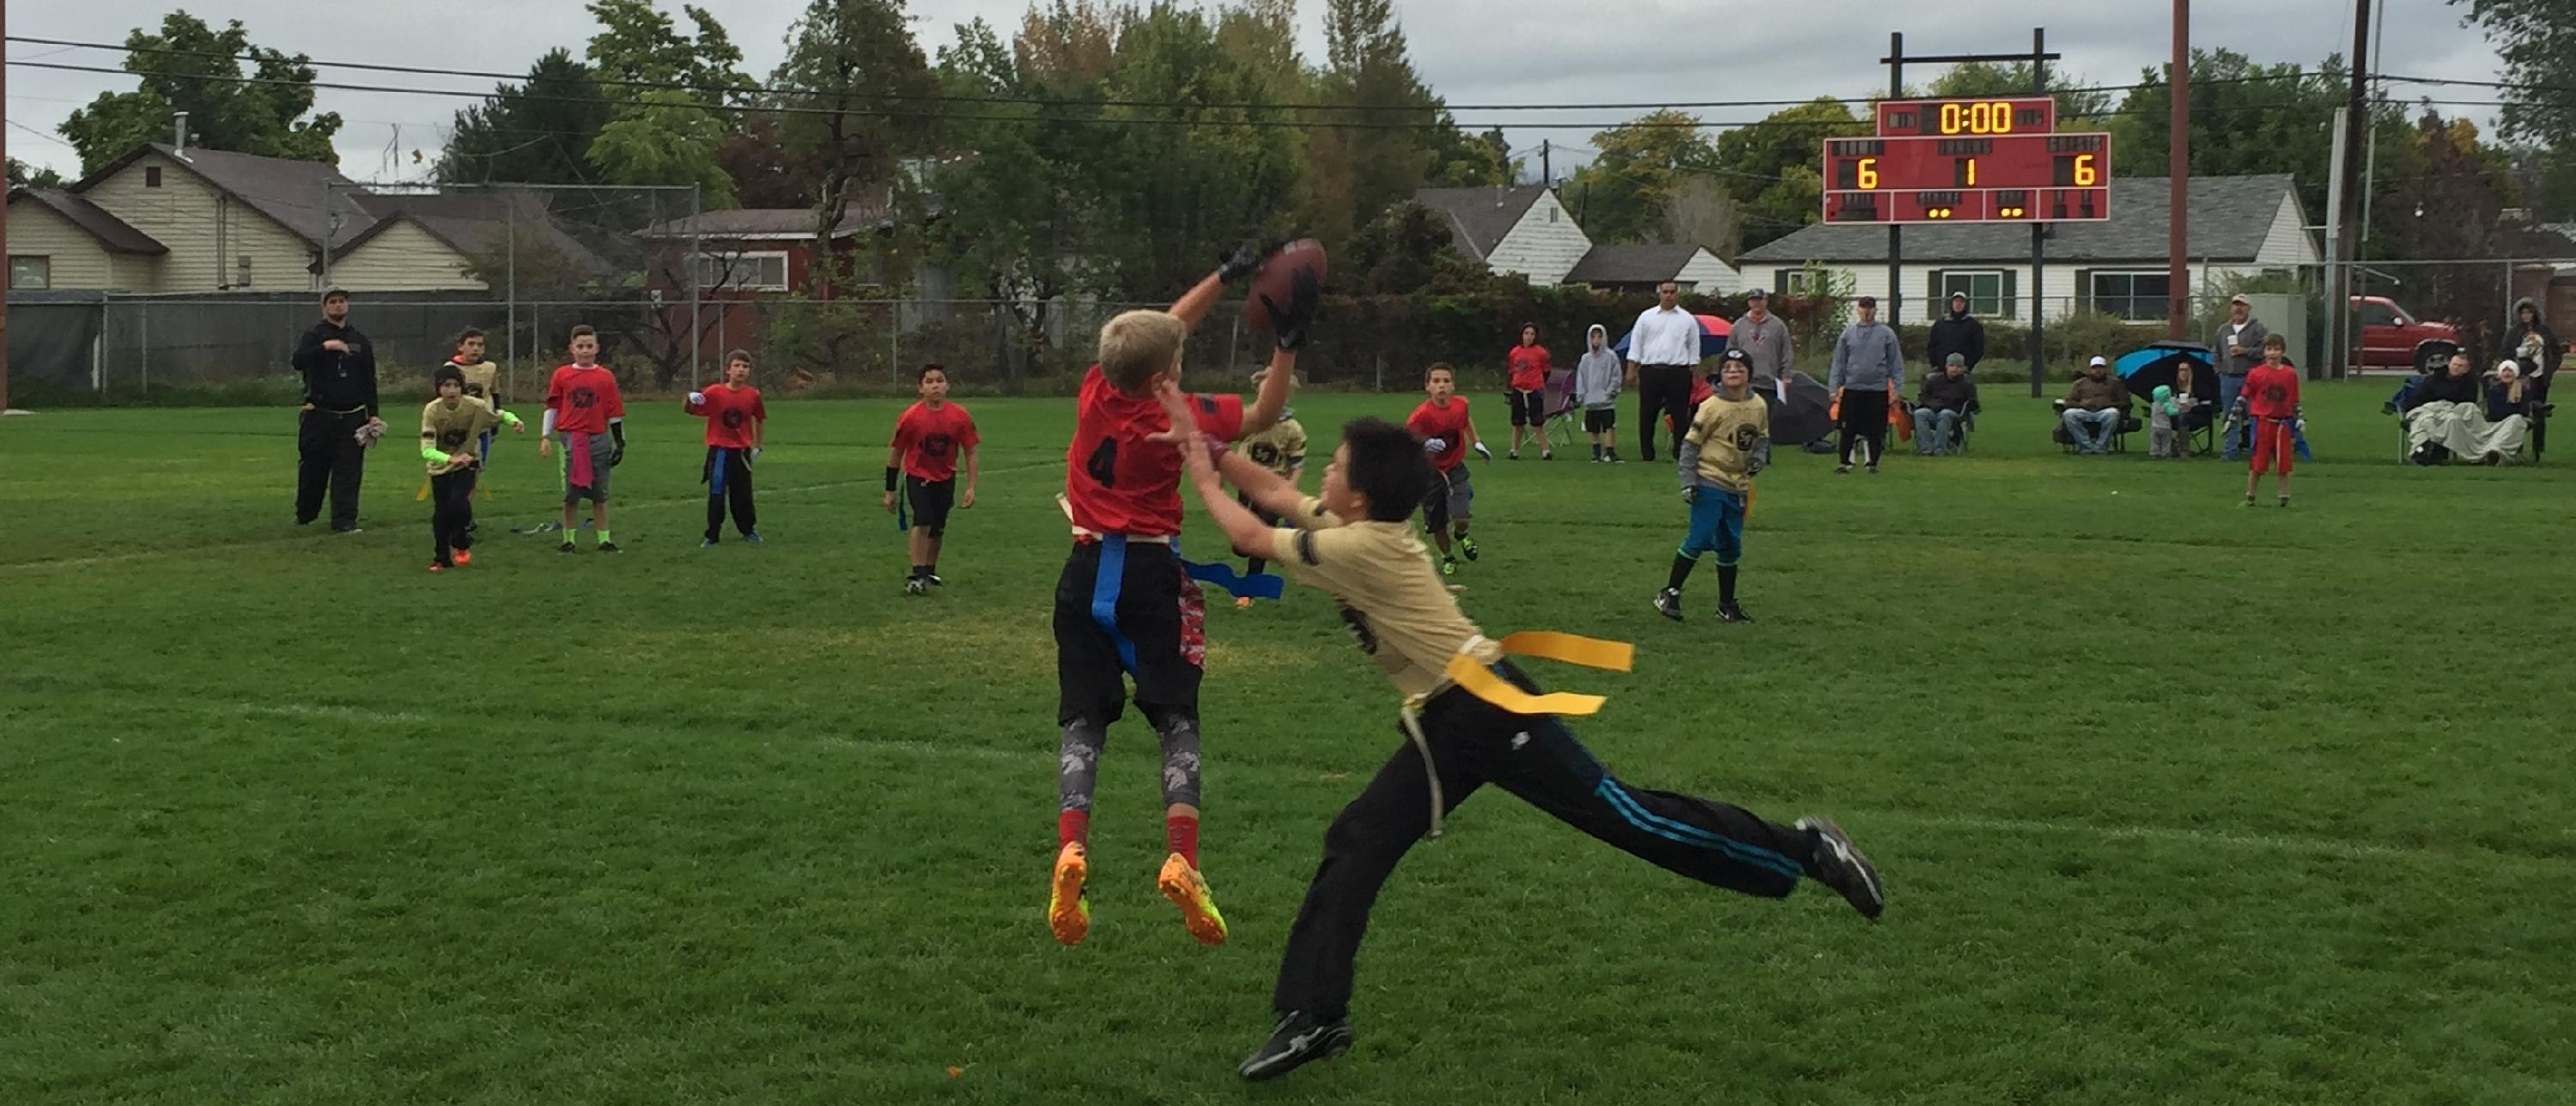 youth participating in a flag football game